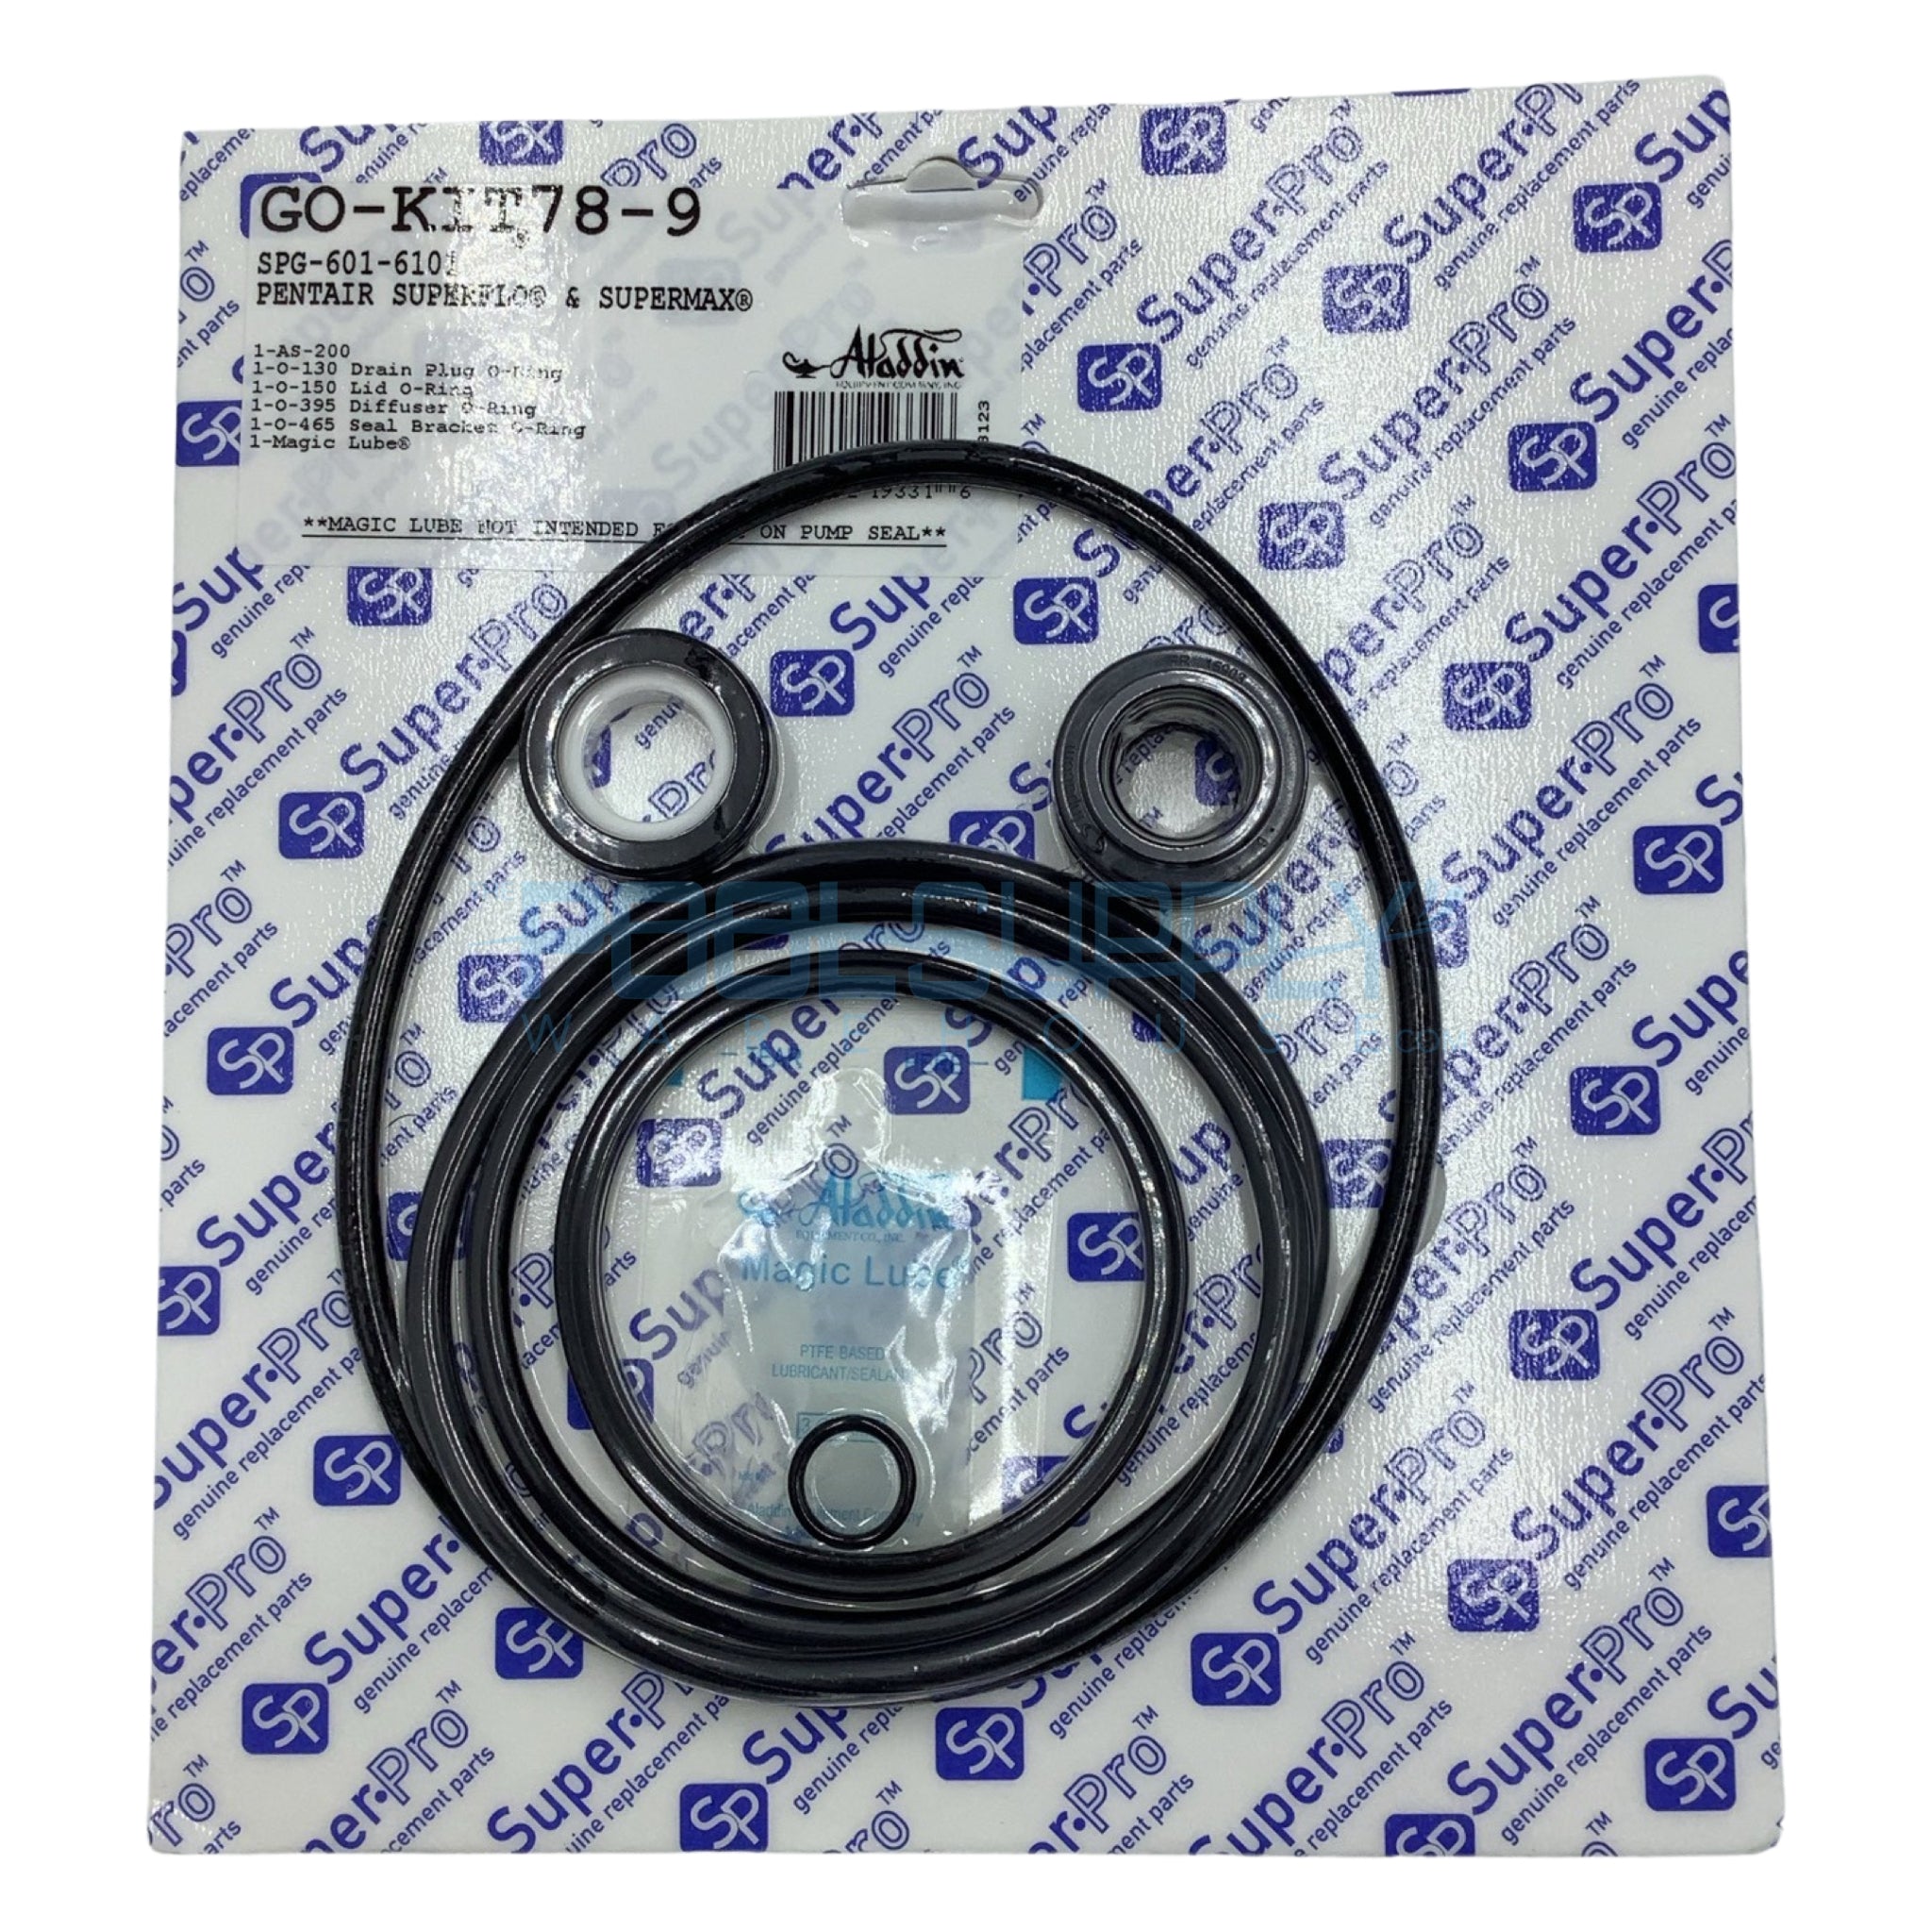 Super-Pro Gasket & O-Ring Kit 78 for Pentair Superflo® Pumps - GO-KIT78-9 - The Pool Supply Warehouse